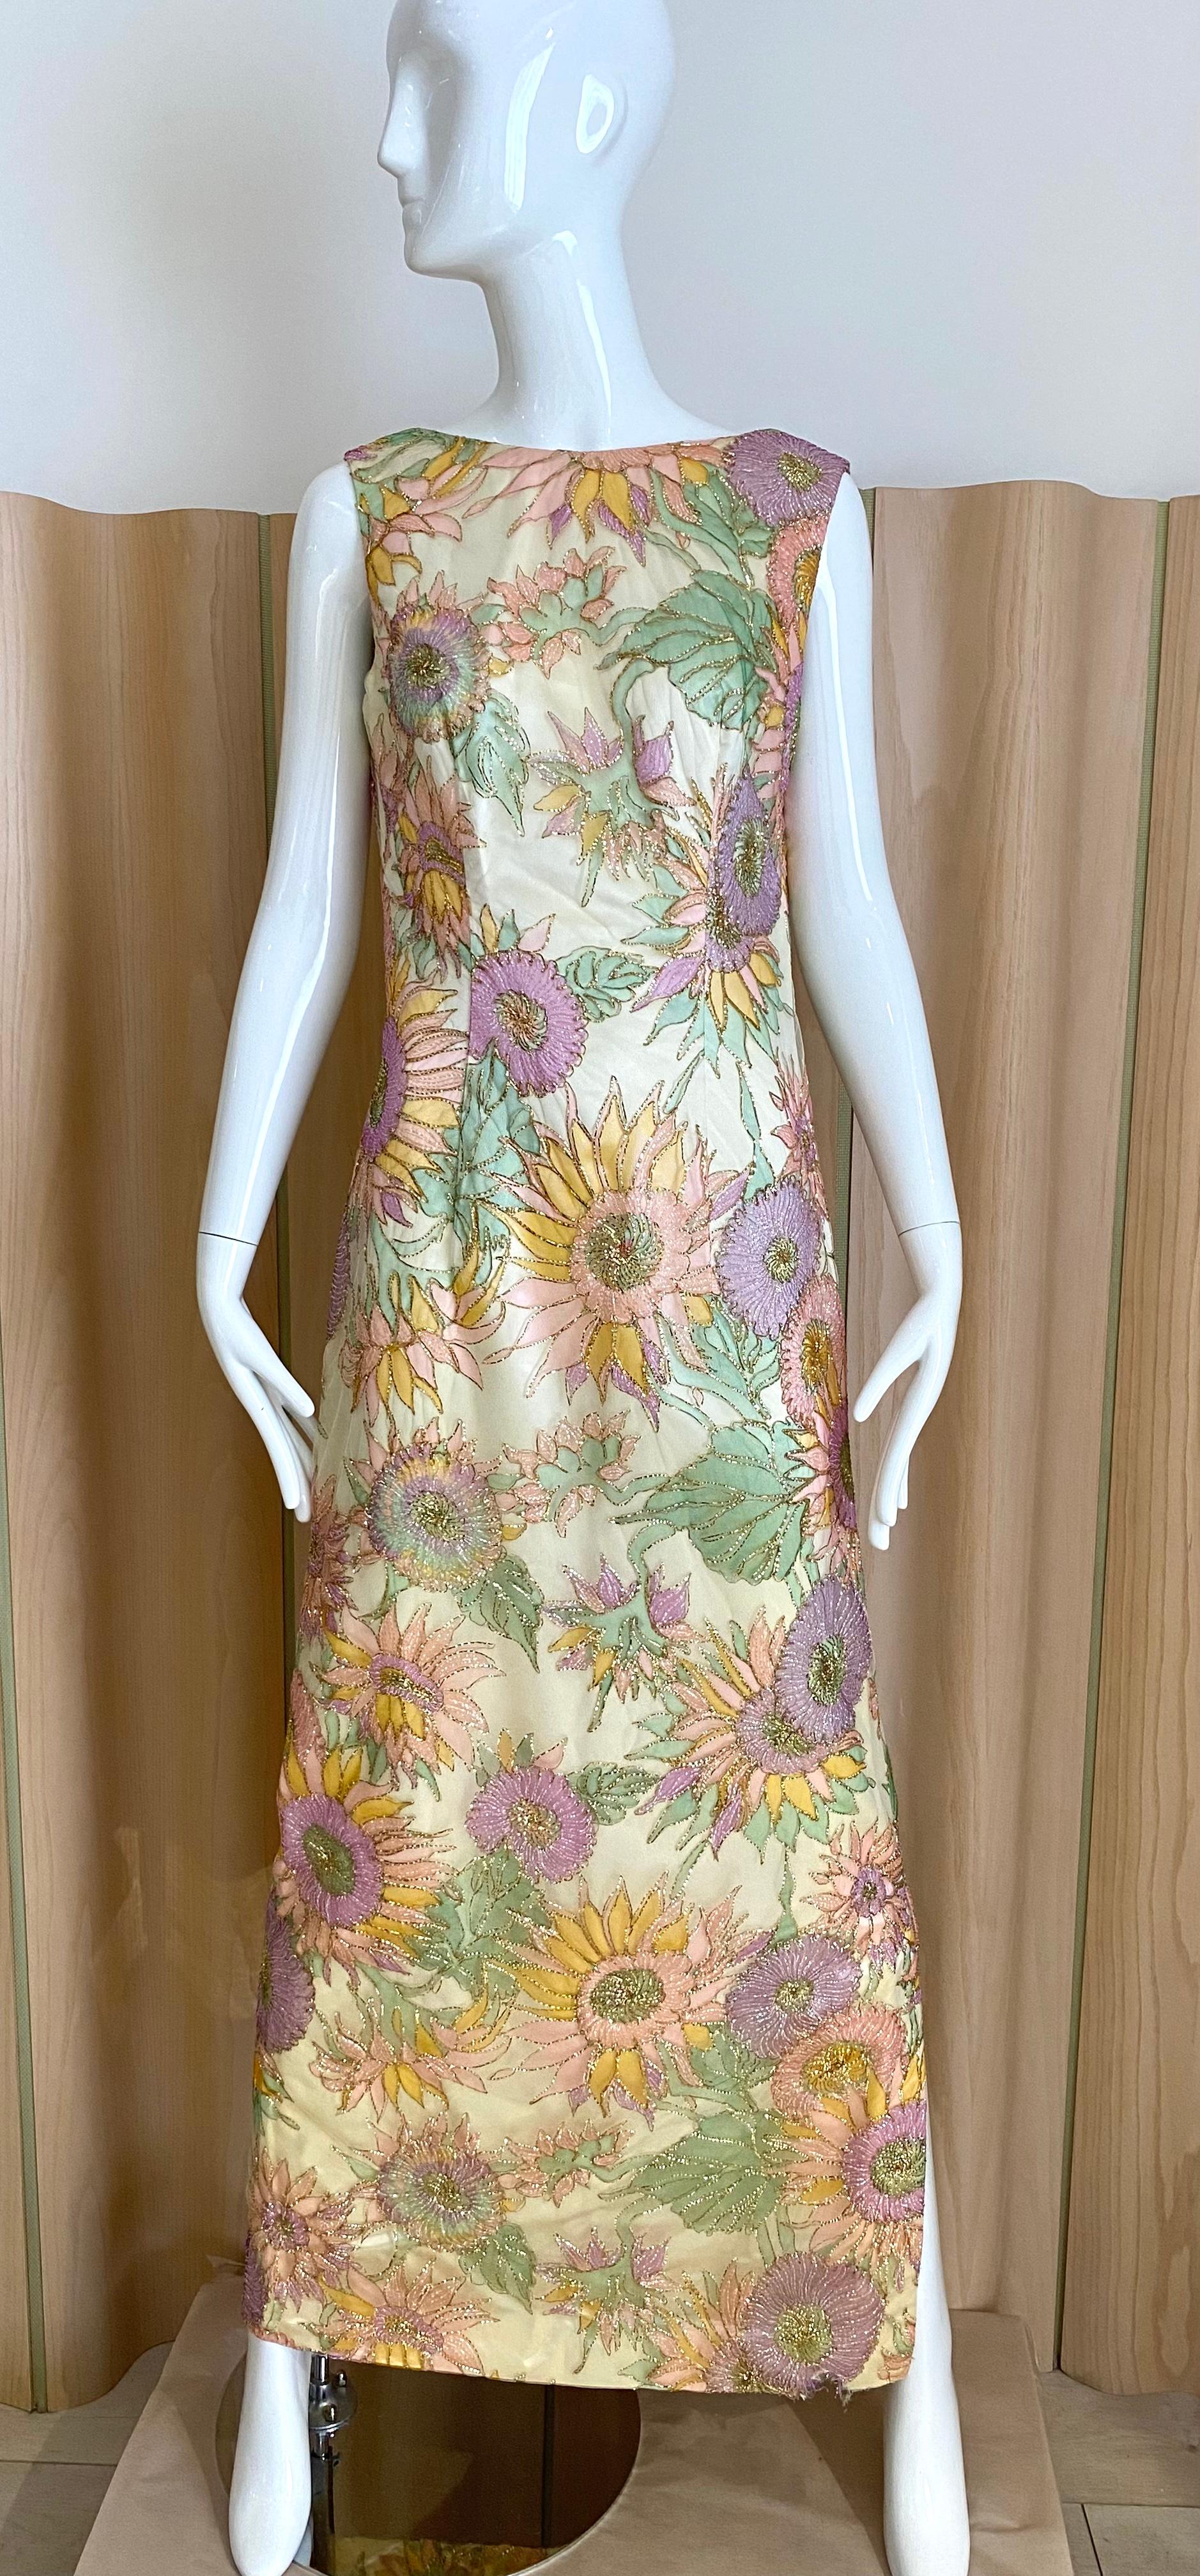 Women's 1960s Sunflowers Print Embroidered  Sleeveless Multi Color Dress For Sale